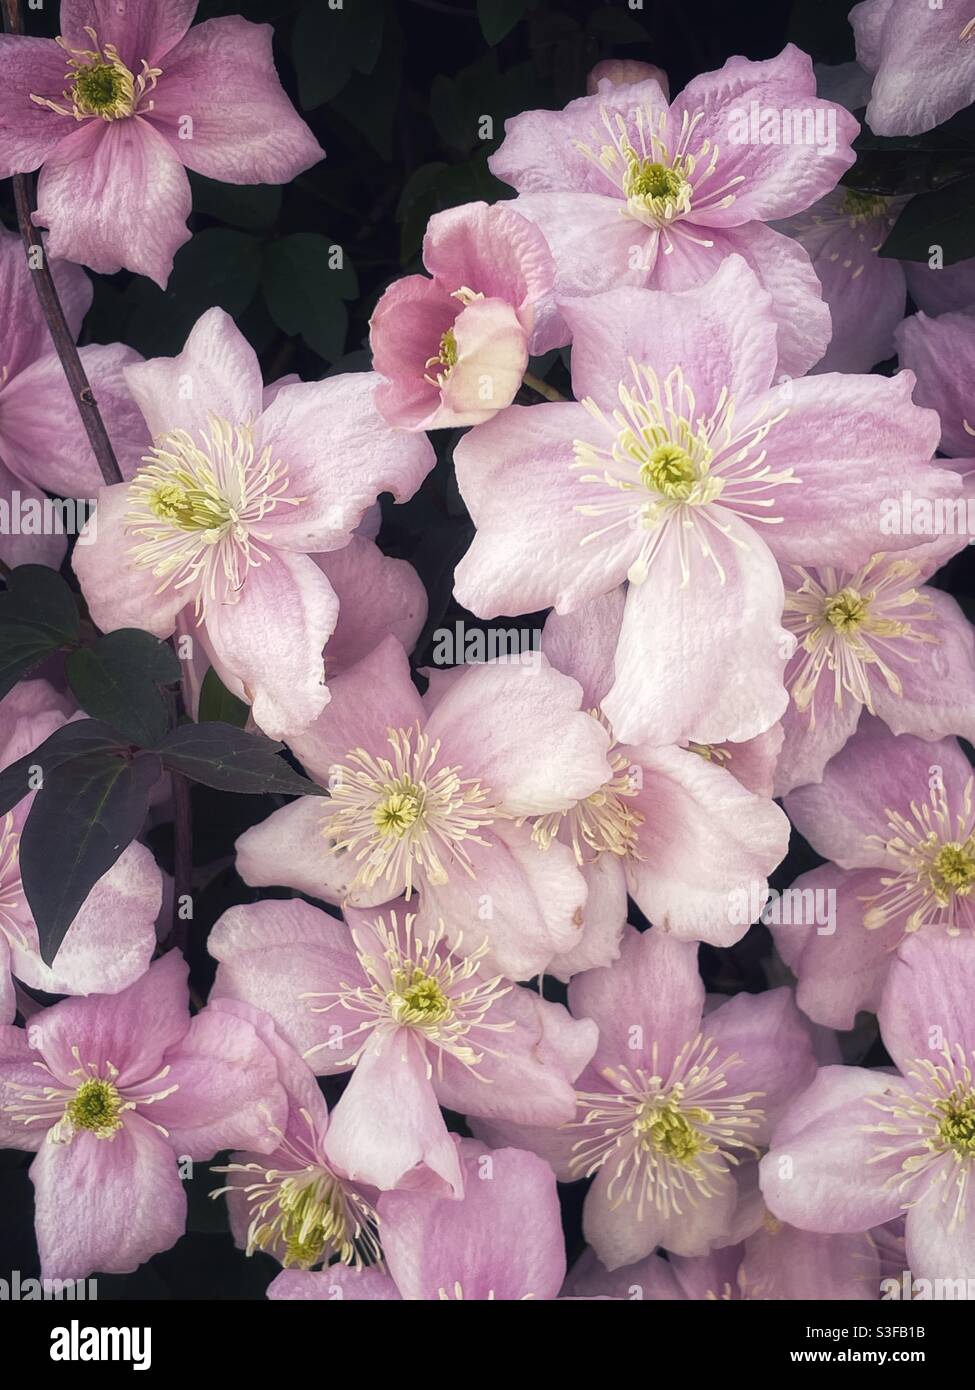 Clematis flowers, May. Stock Photo